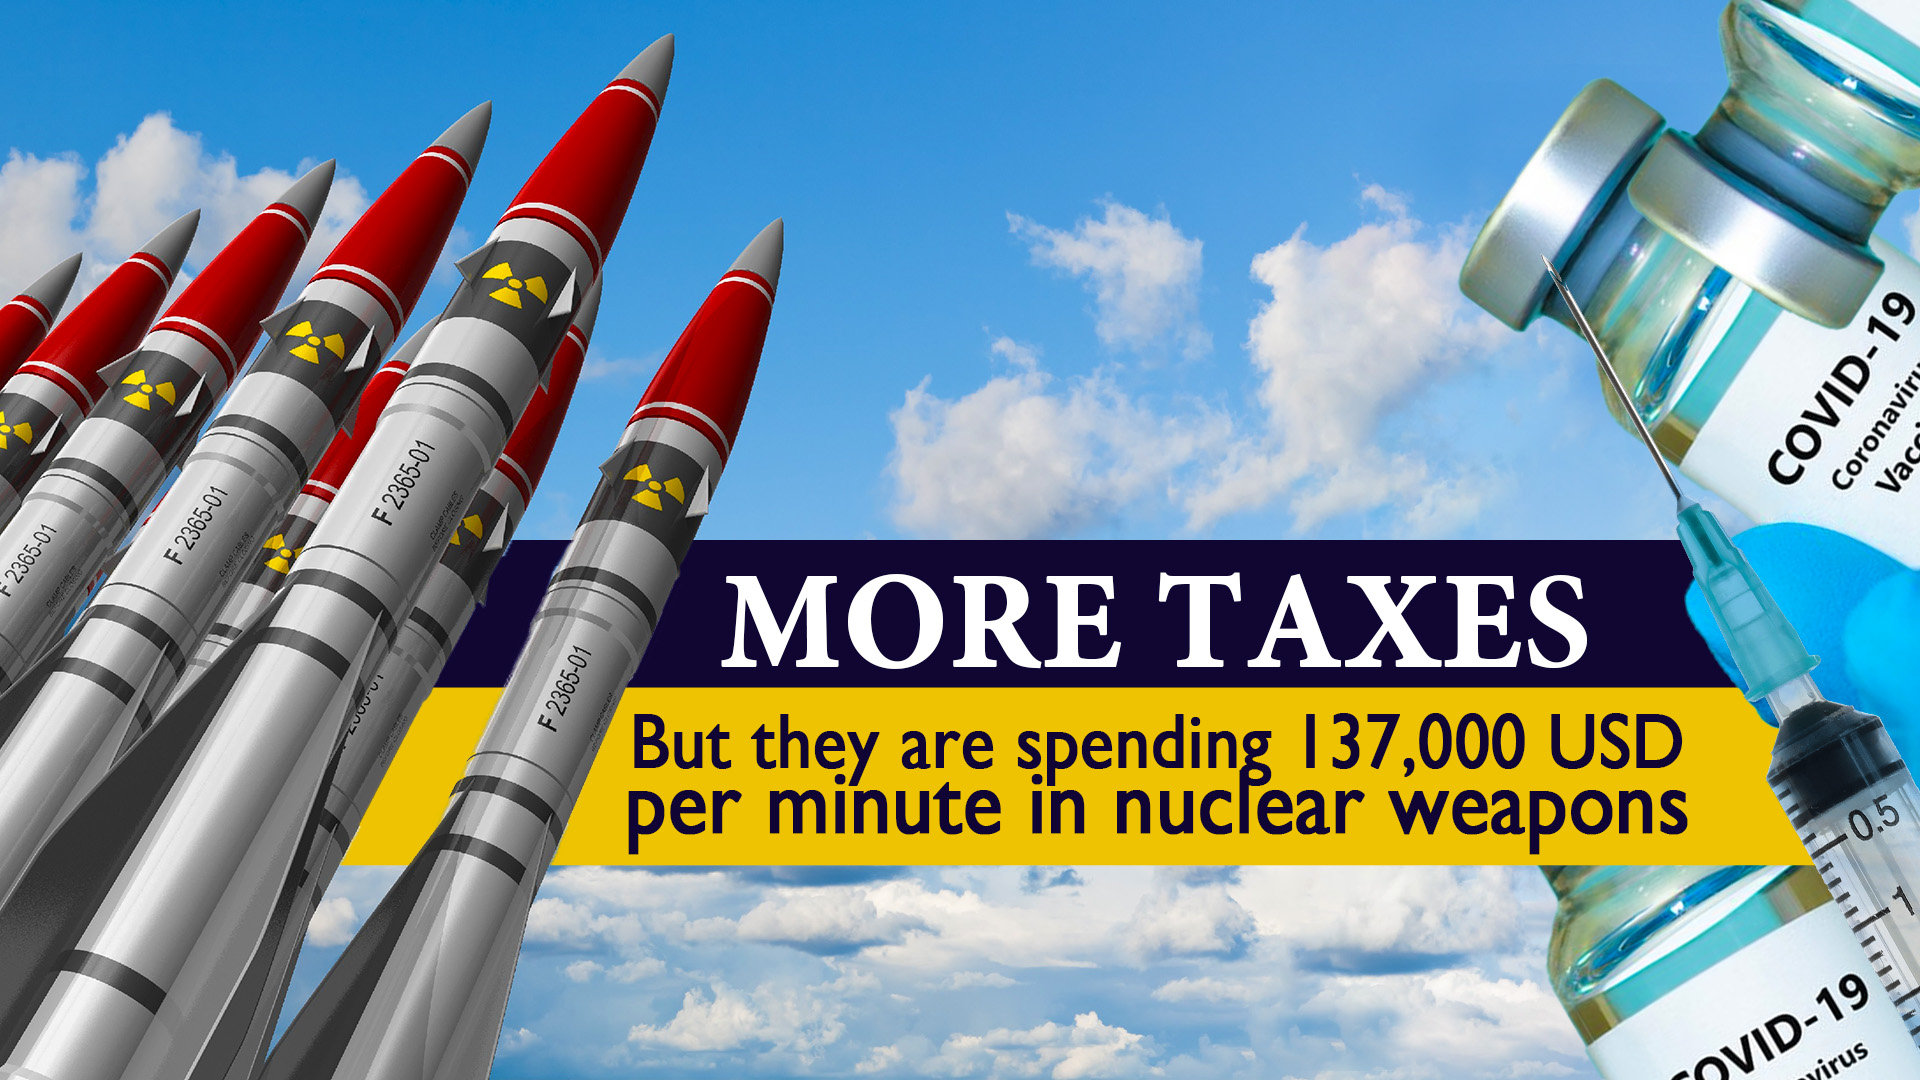 More taxes but still spending on nuclear weapons